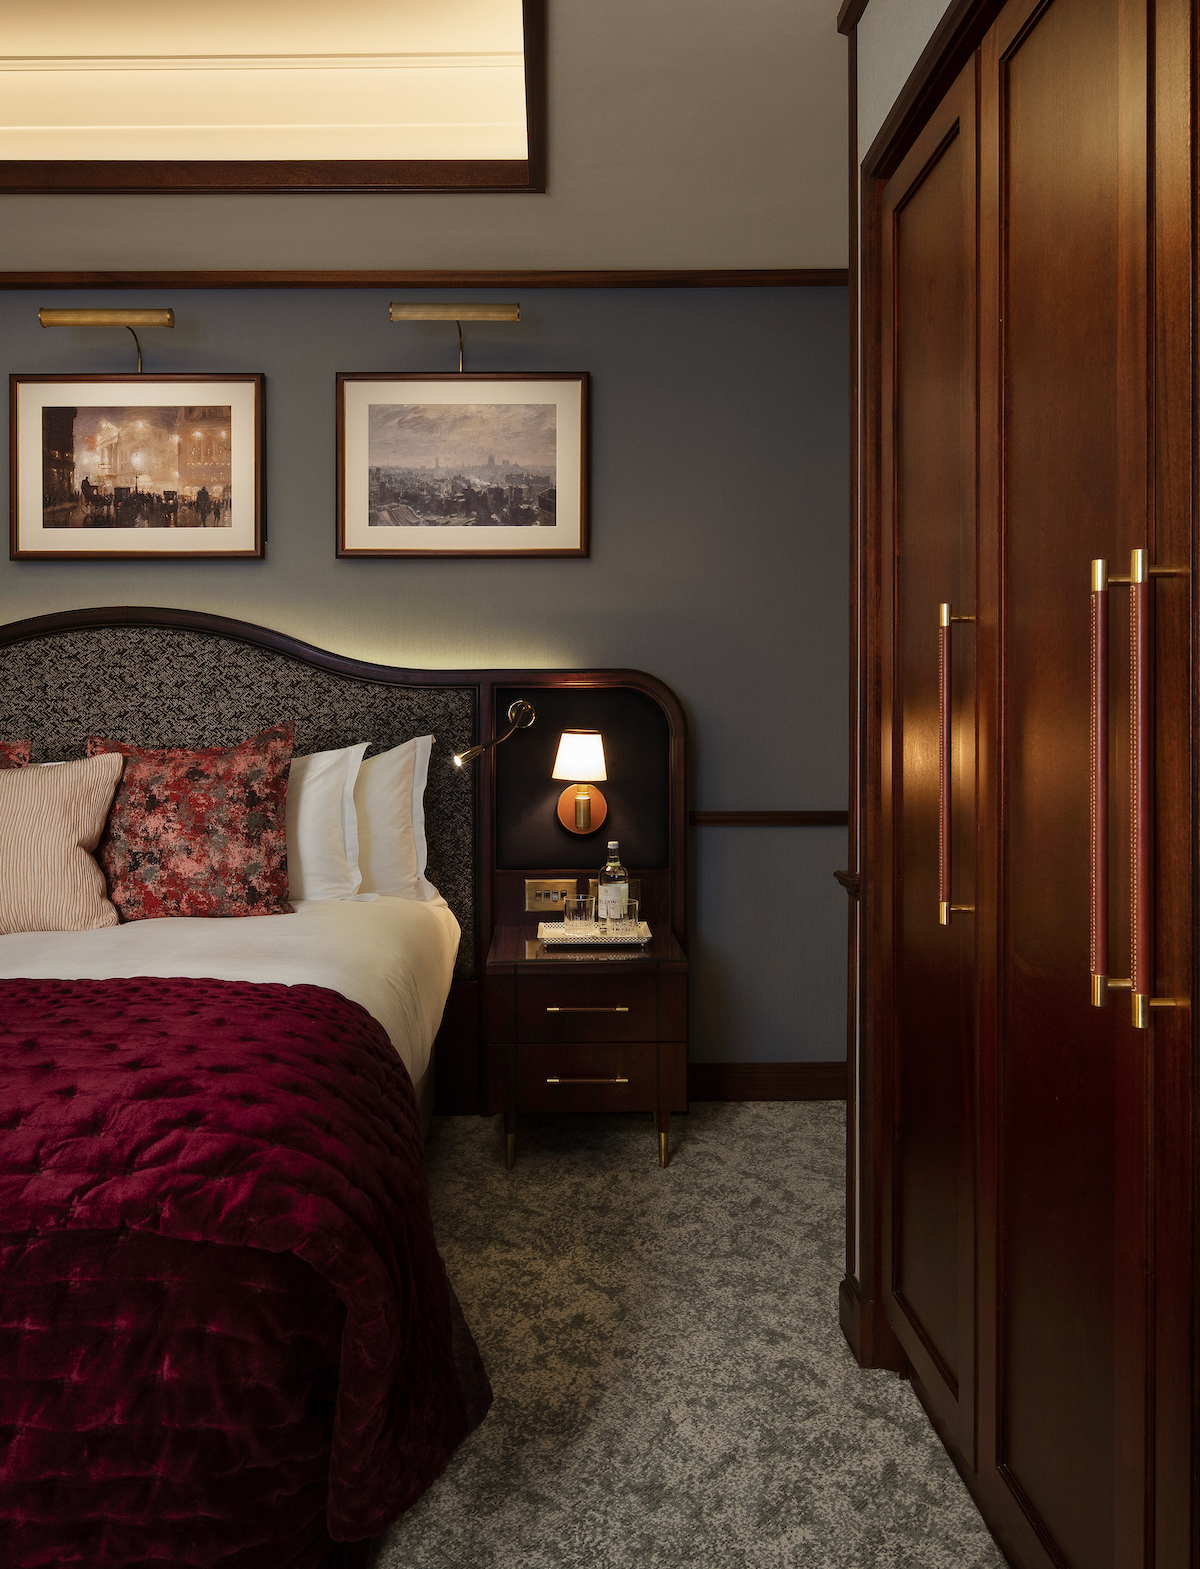 Image caption: The guestrooms inside The Stafford Hotel were designed by Dale Atkinson and his team, following winning over the client when the studio designed the hotel's American Bar. | Image credit: Rosendale Design